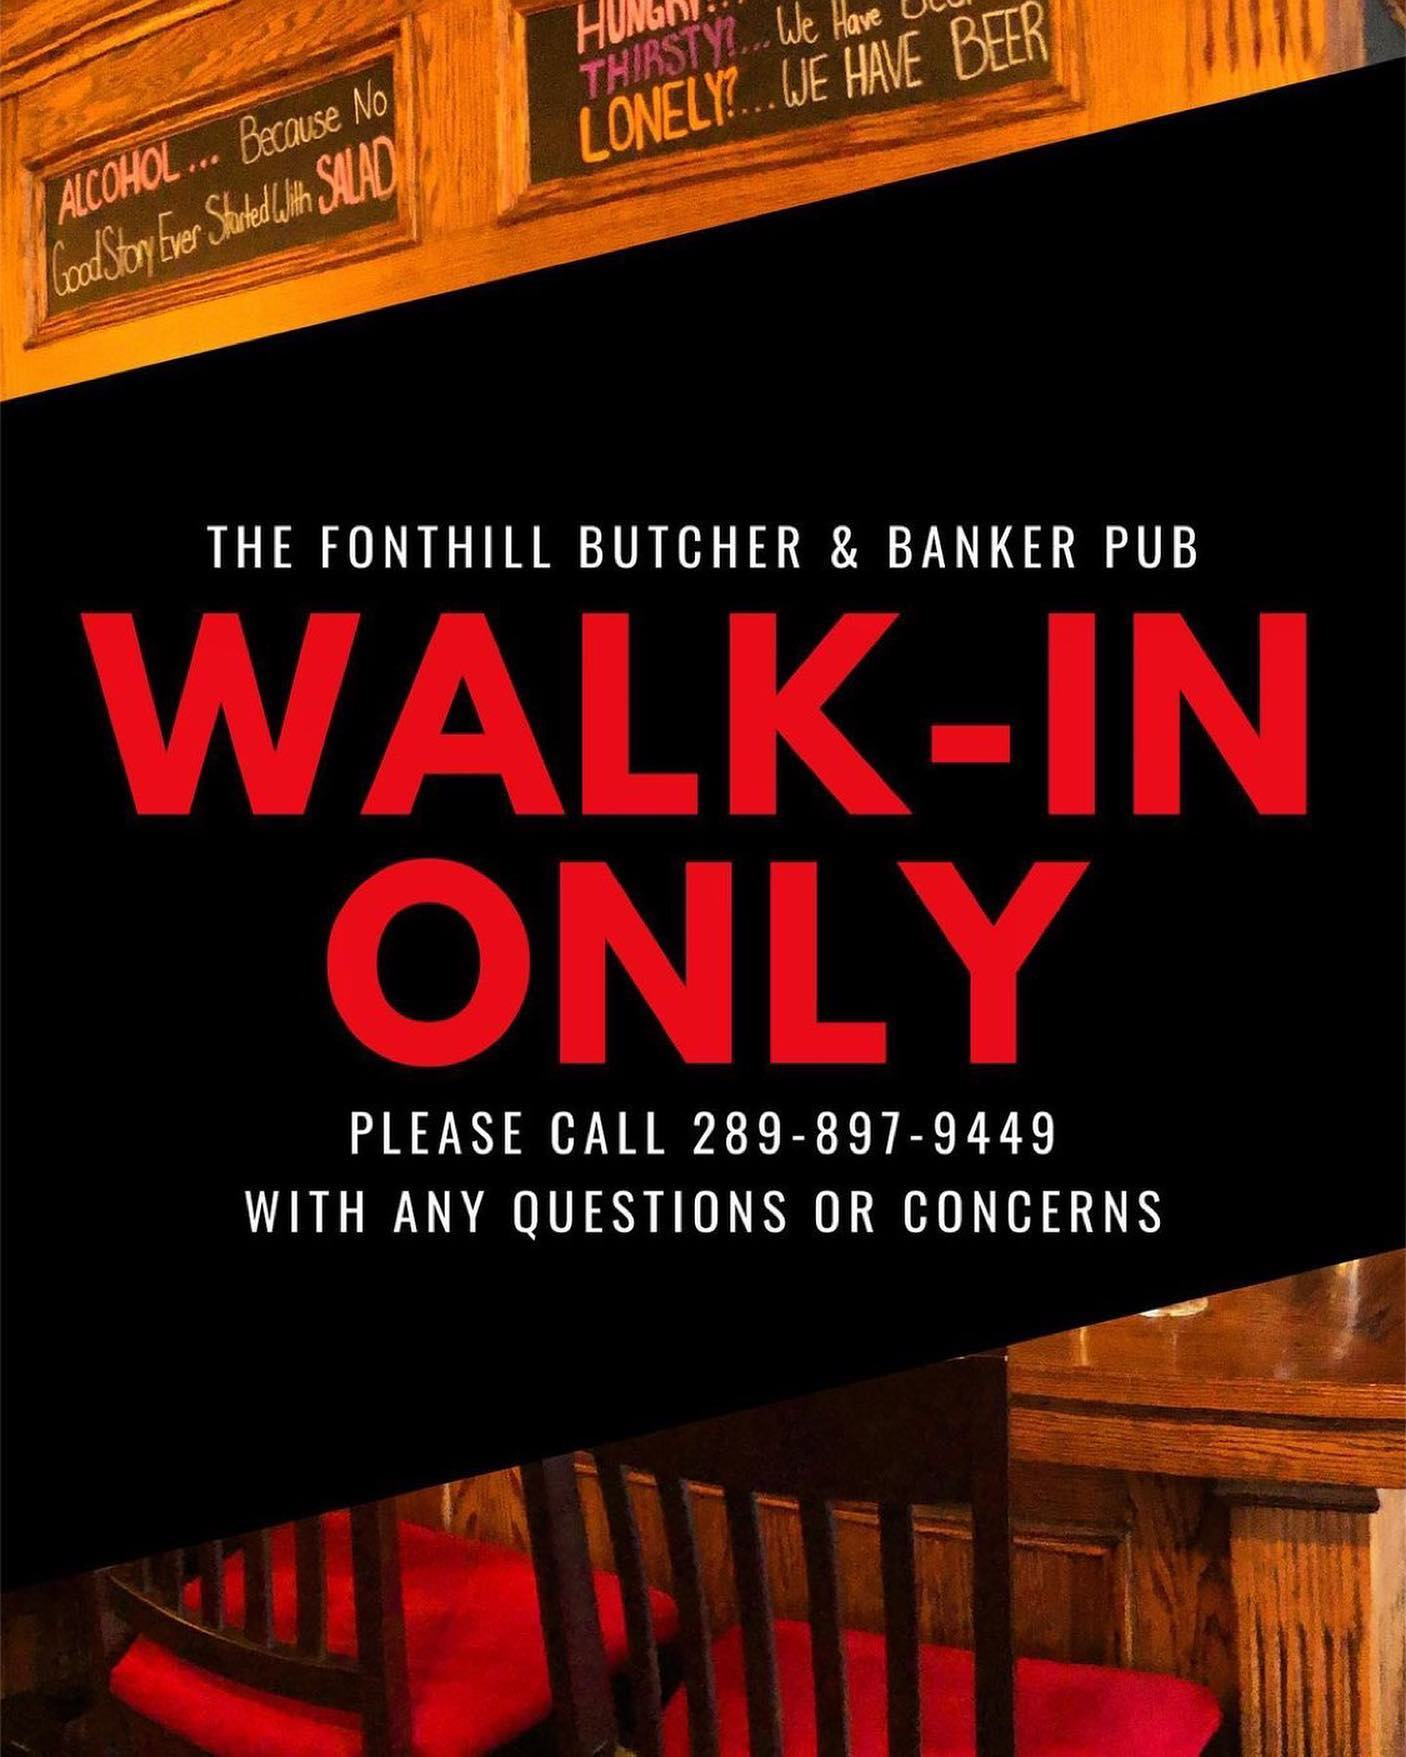 Fonthill Butcher & Banker Pub Now Open: Walk-ins Only